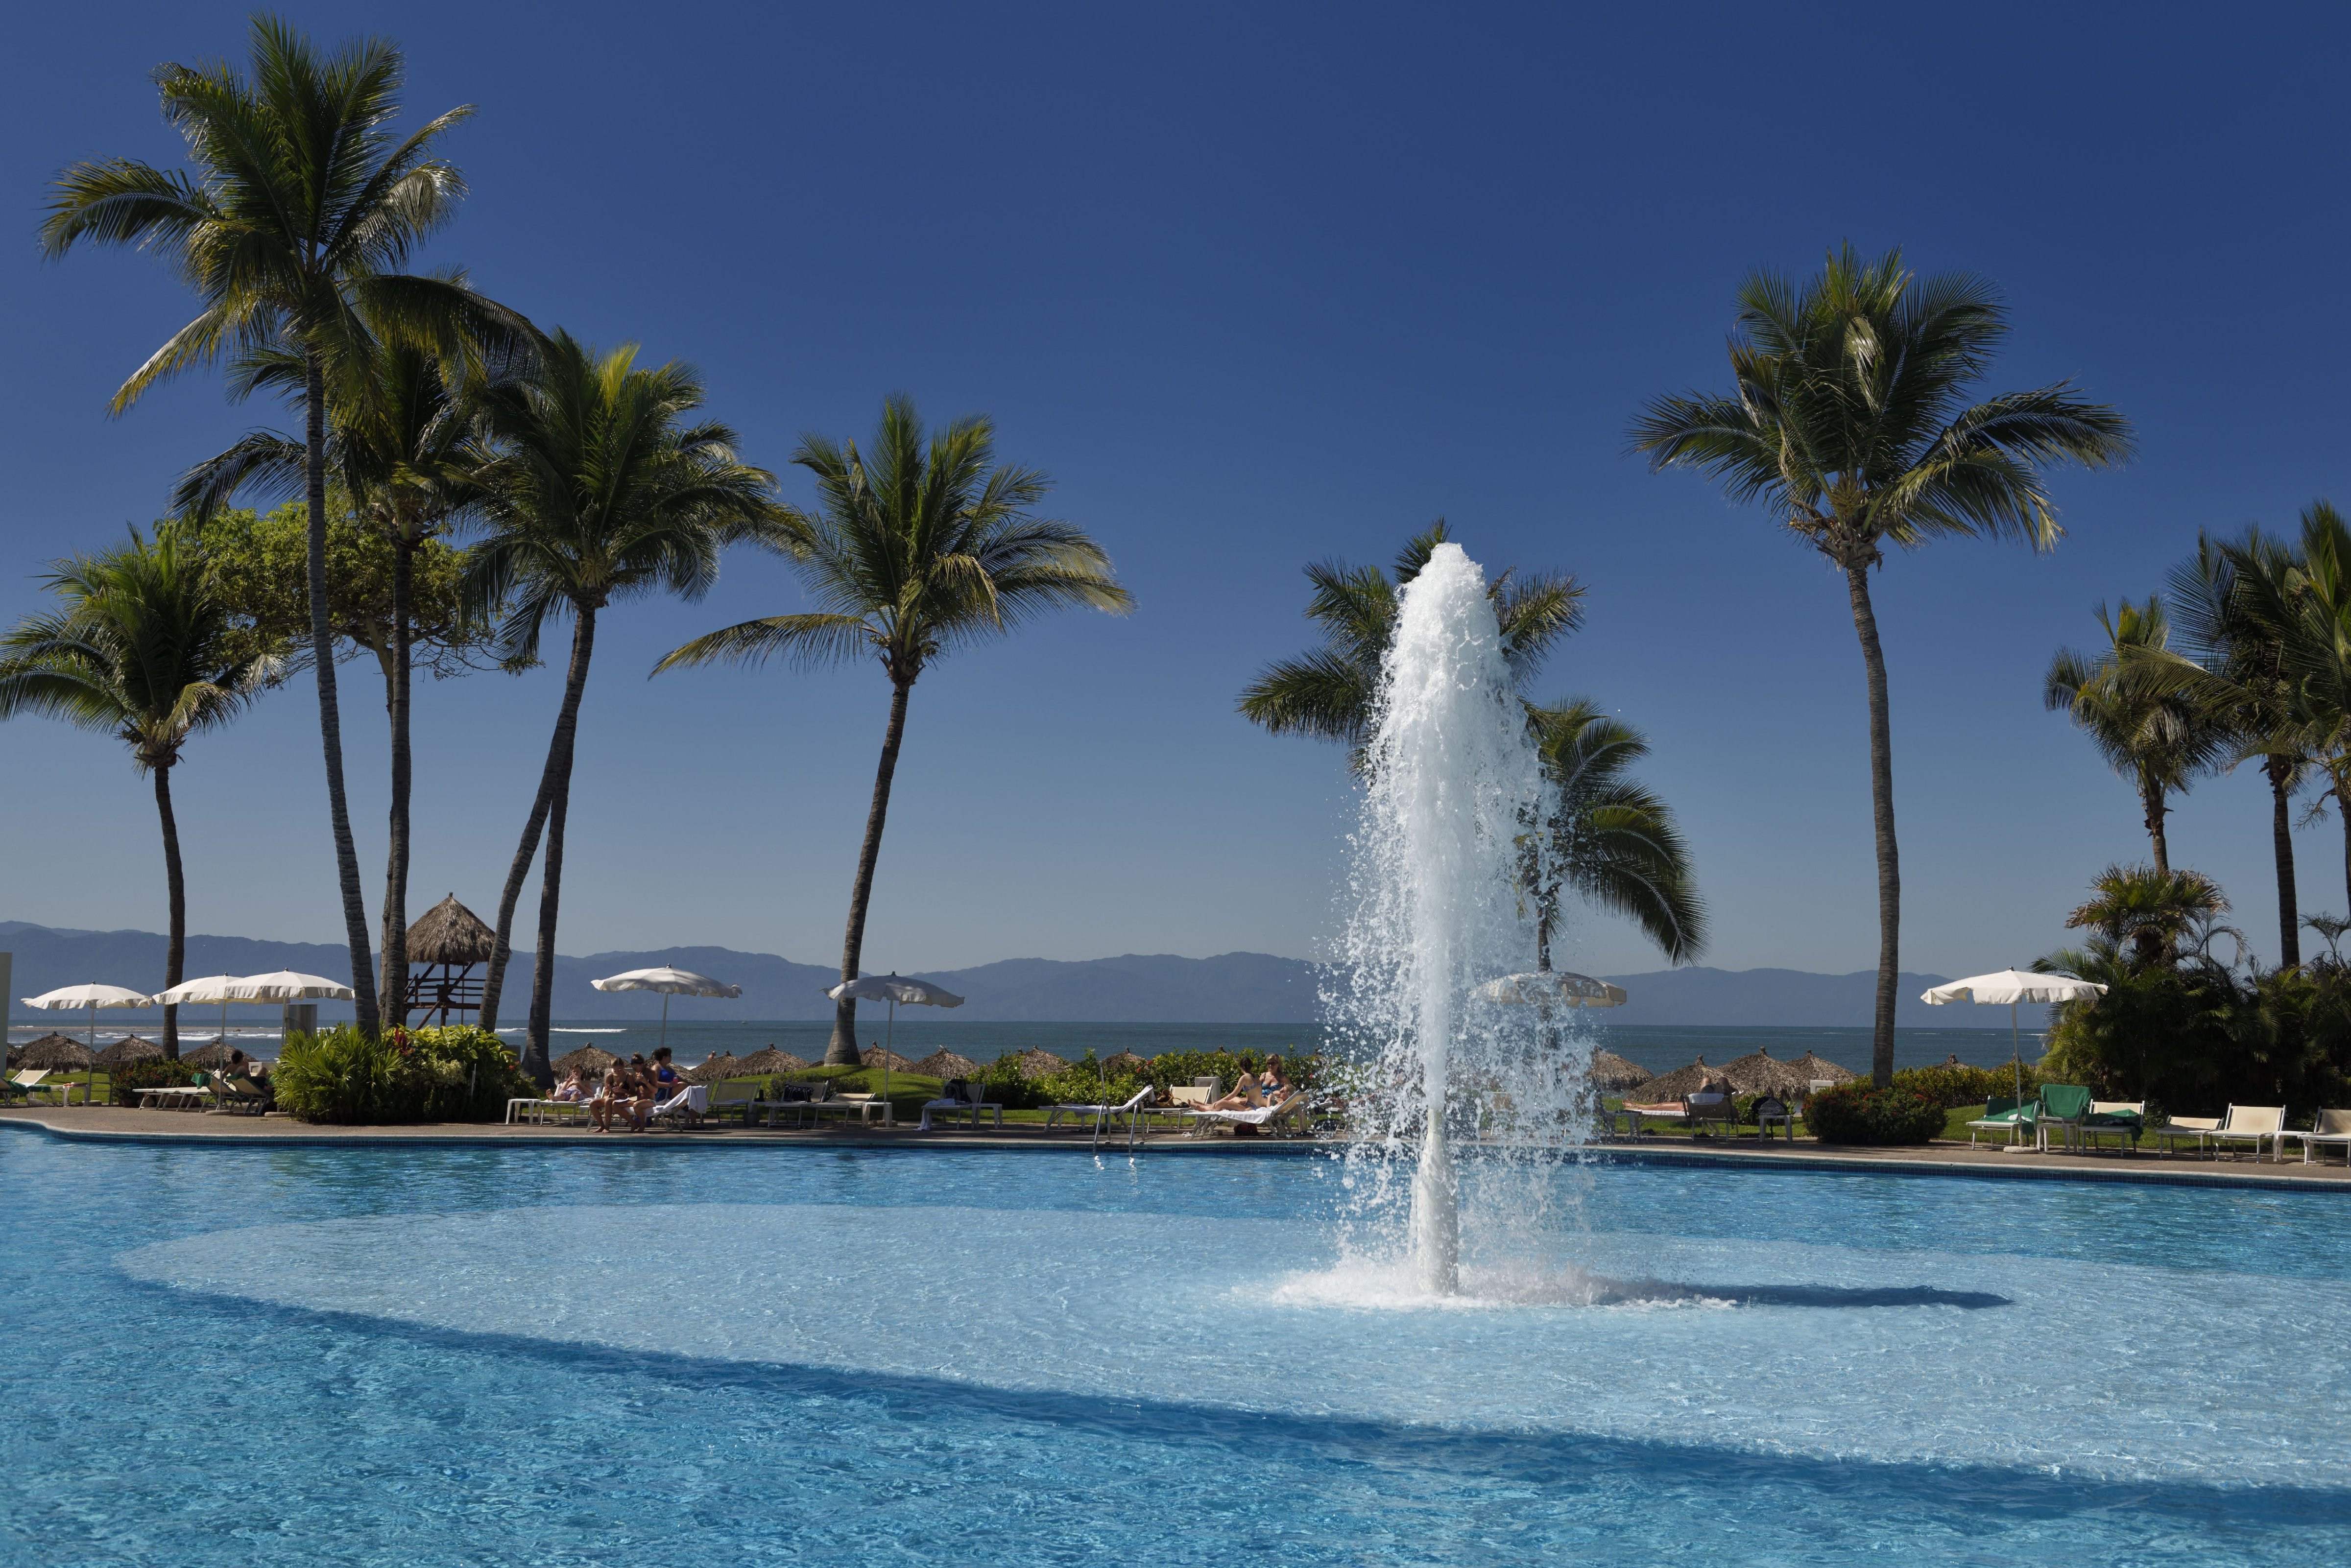 Pool with fountain at Nuevo Vallarta Mexico with Palm trees and vacationers. (Education Images—UIG via Getty Images)